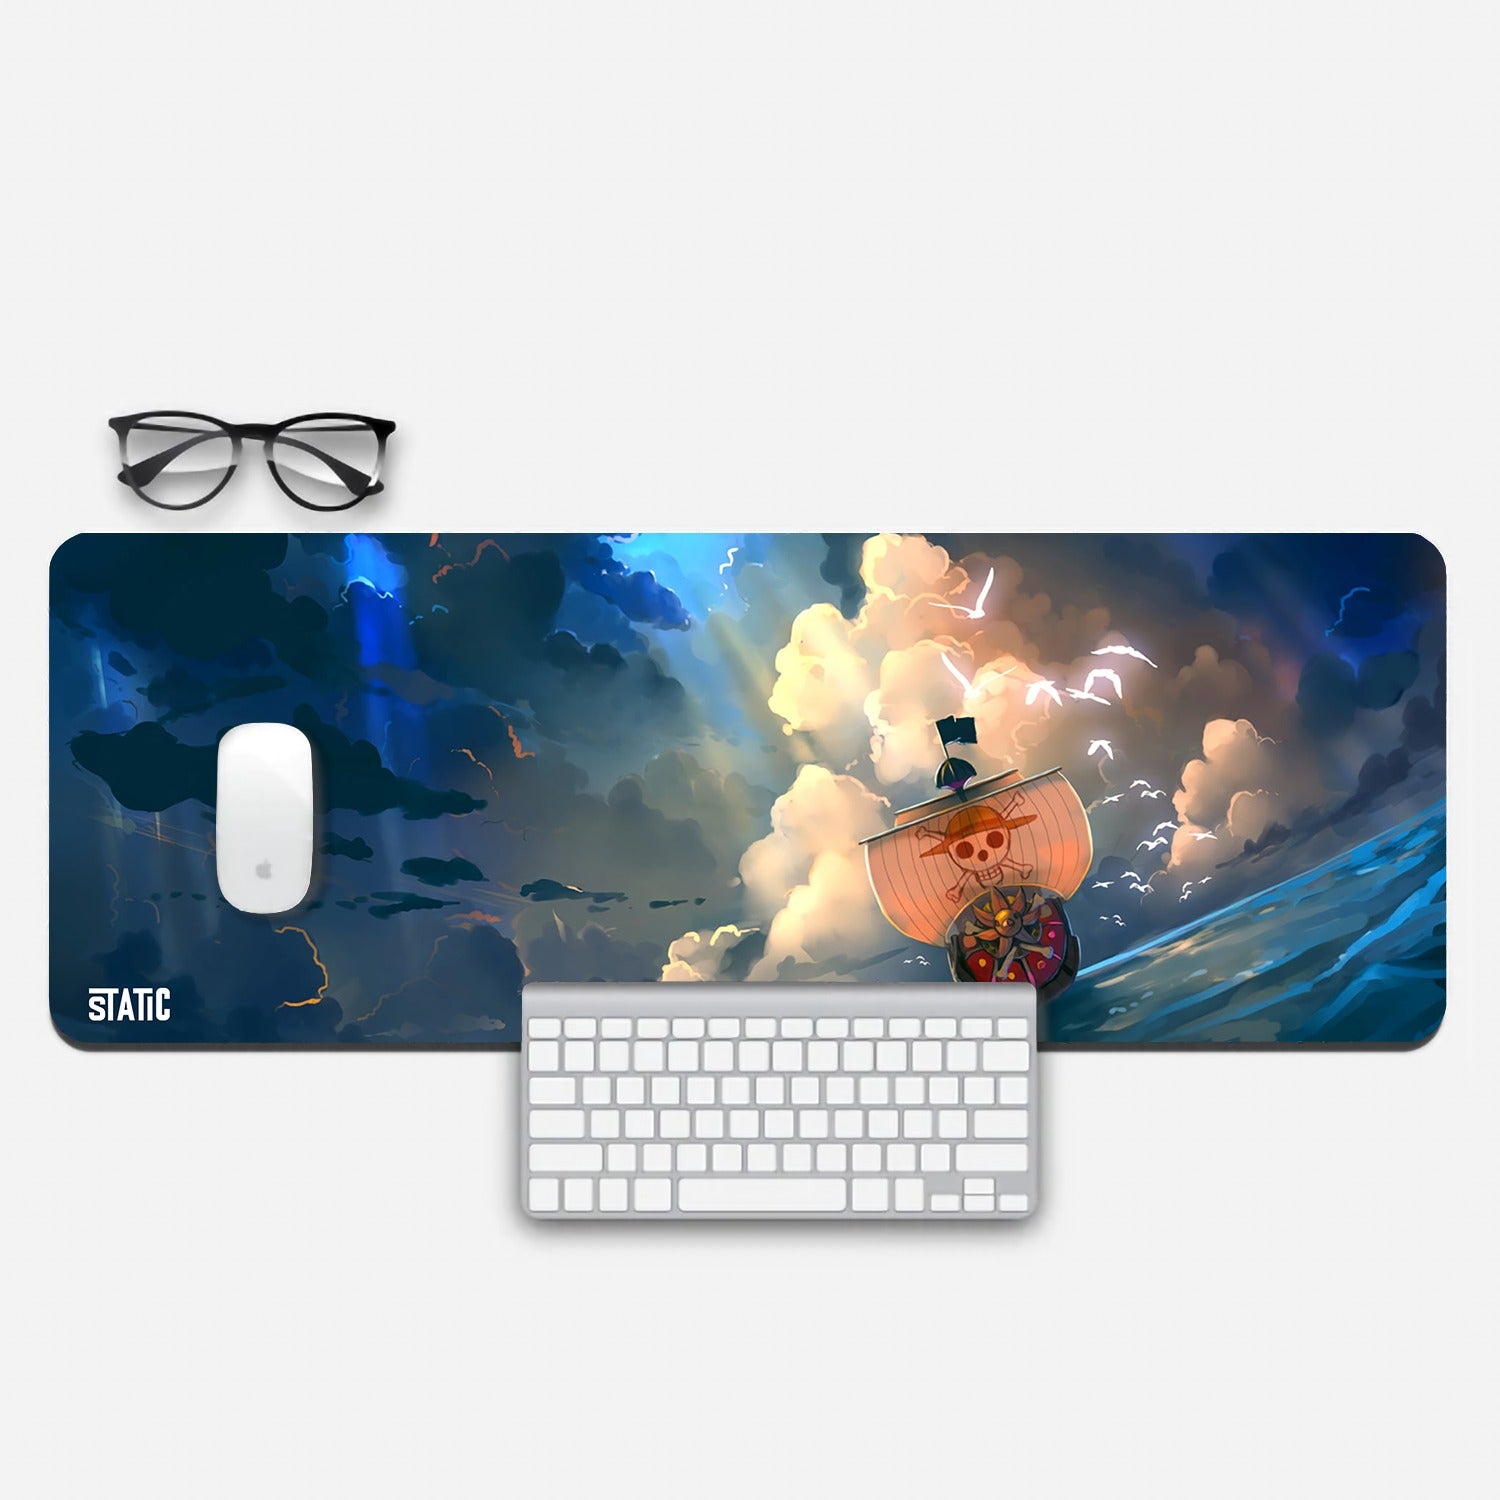 Sail the high seas of gaming with our extended mouse pad - Thousand Sunny Edition. Immerse yourself in the world of One Piece as the iconic Thousand Sunny ship sails under a dramatic, sunlit cloudy sky, surrounded by soaring seagulls. Elevate your gaming experience with this captivating design, offering precision and control. Order now and join the Straw Hat Pirates on epic adventures, conquering gaming challenges with the spirit of a true pirate!